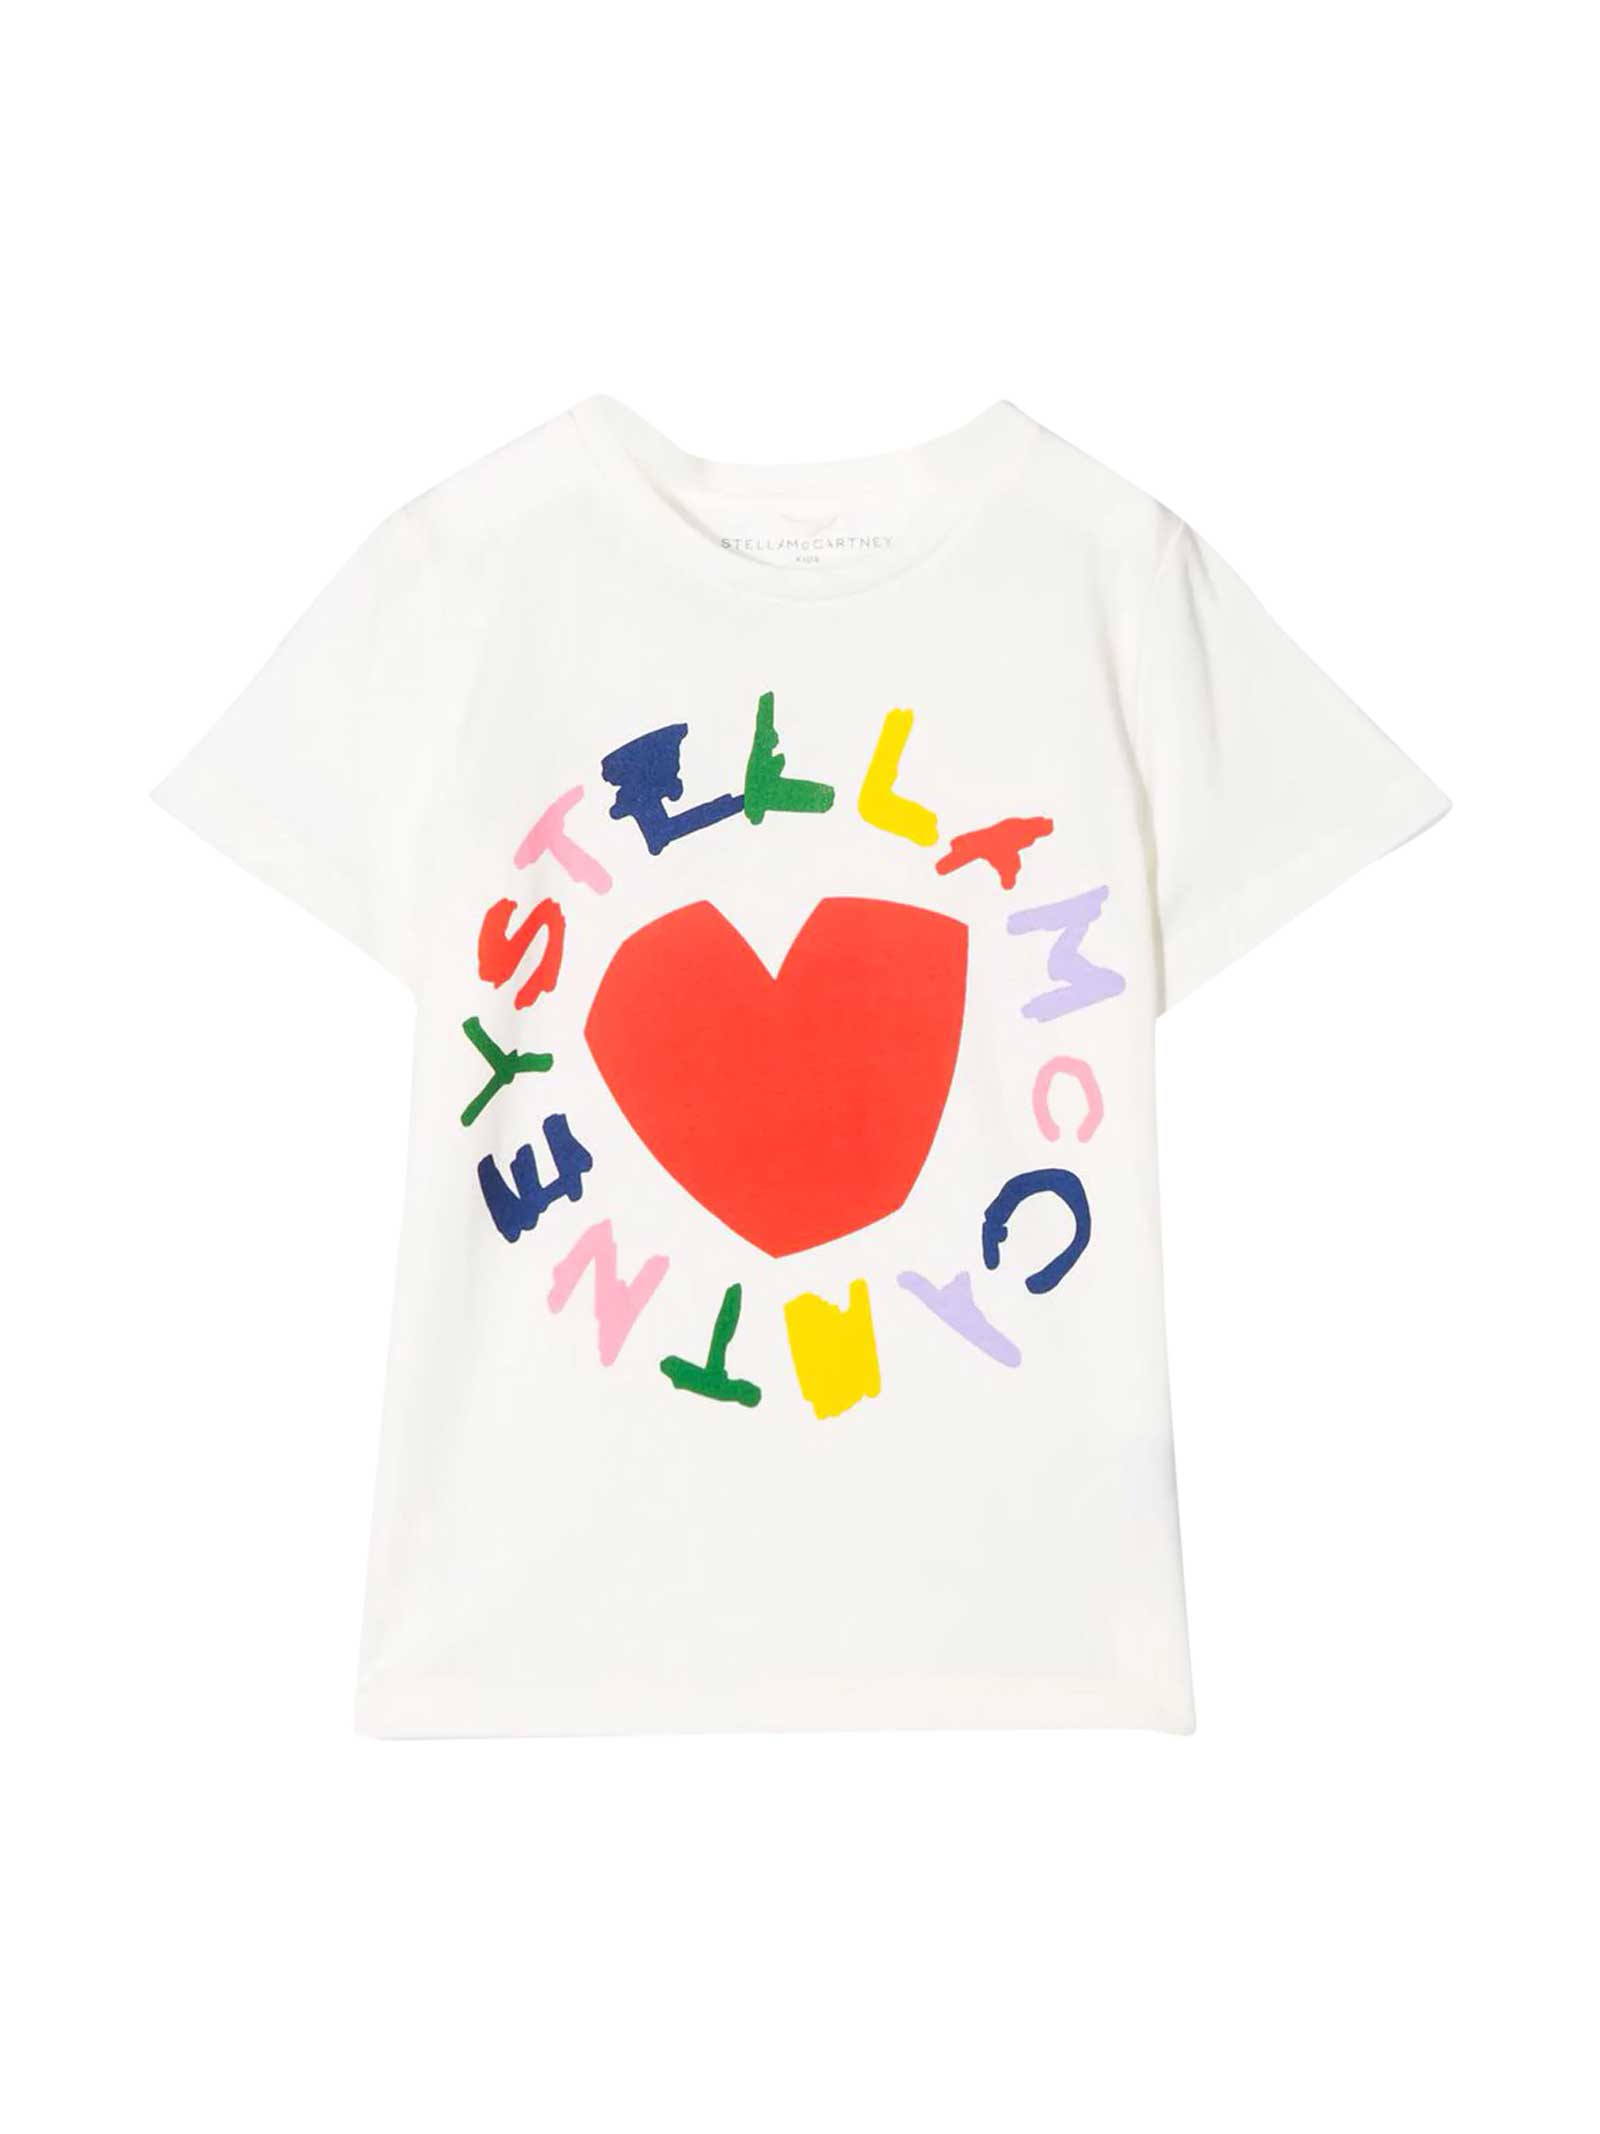 STELLA MCCARTNEY WHITE TEEN T-SHIRT WITH MULTICOLOR PRESS,11206388